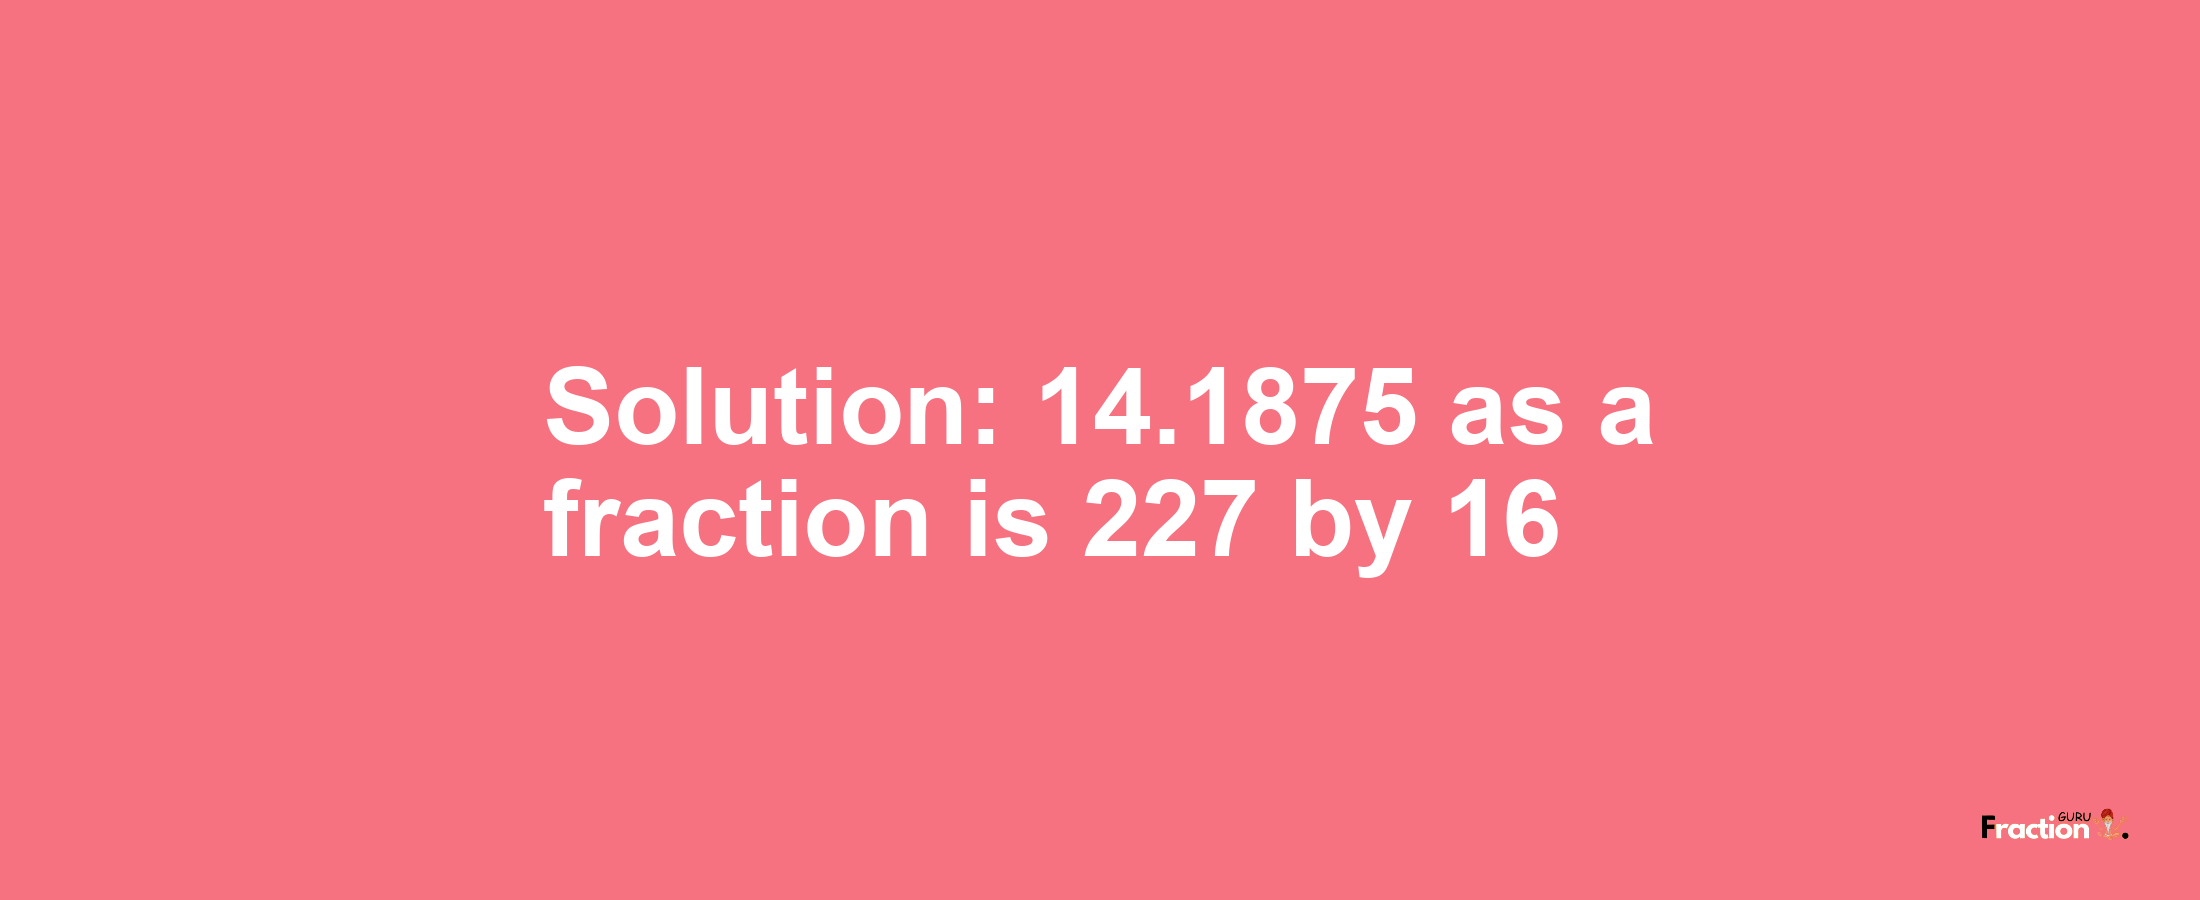 Solution:14.1875 as a fraction is 227/16